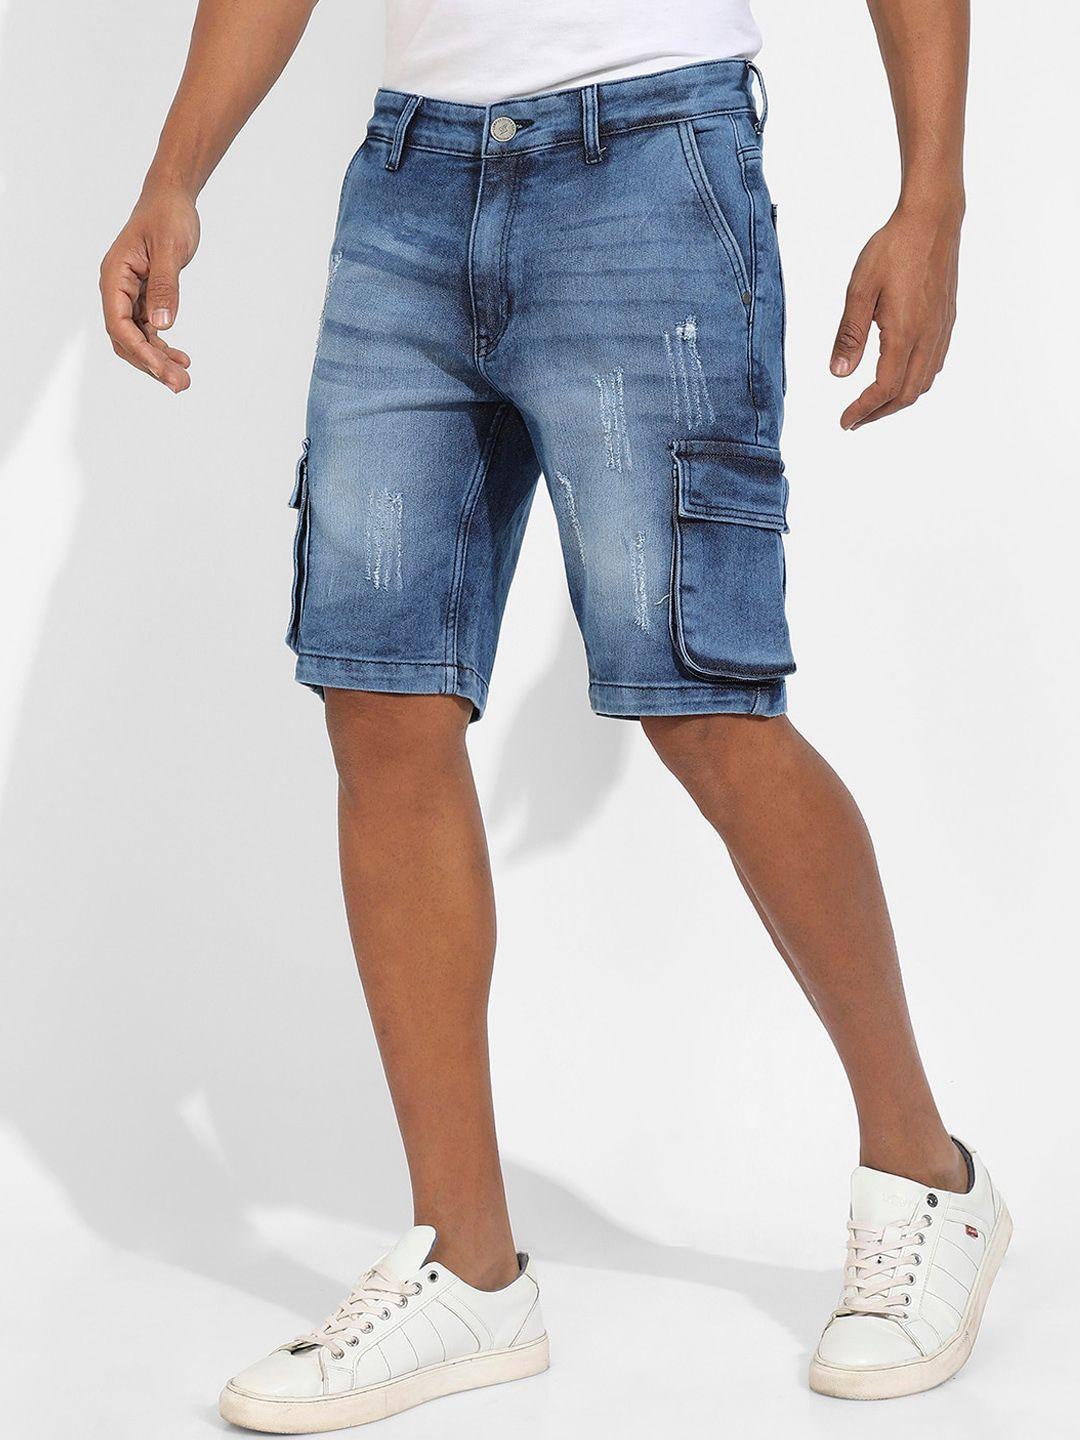 campus-sutra-men-washed-regular-fit-mid-rise-outdoor-cotton-shorts